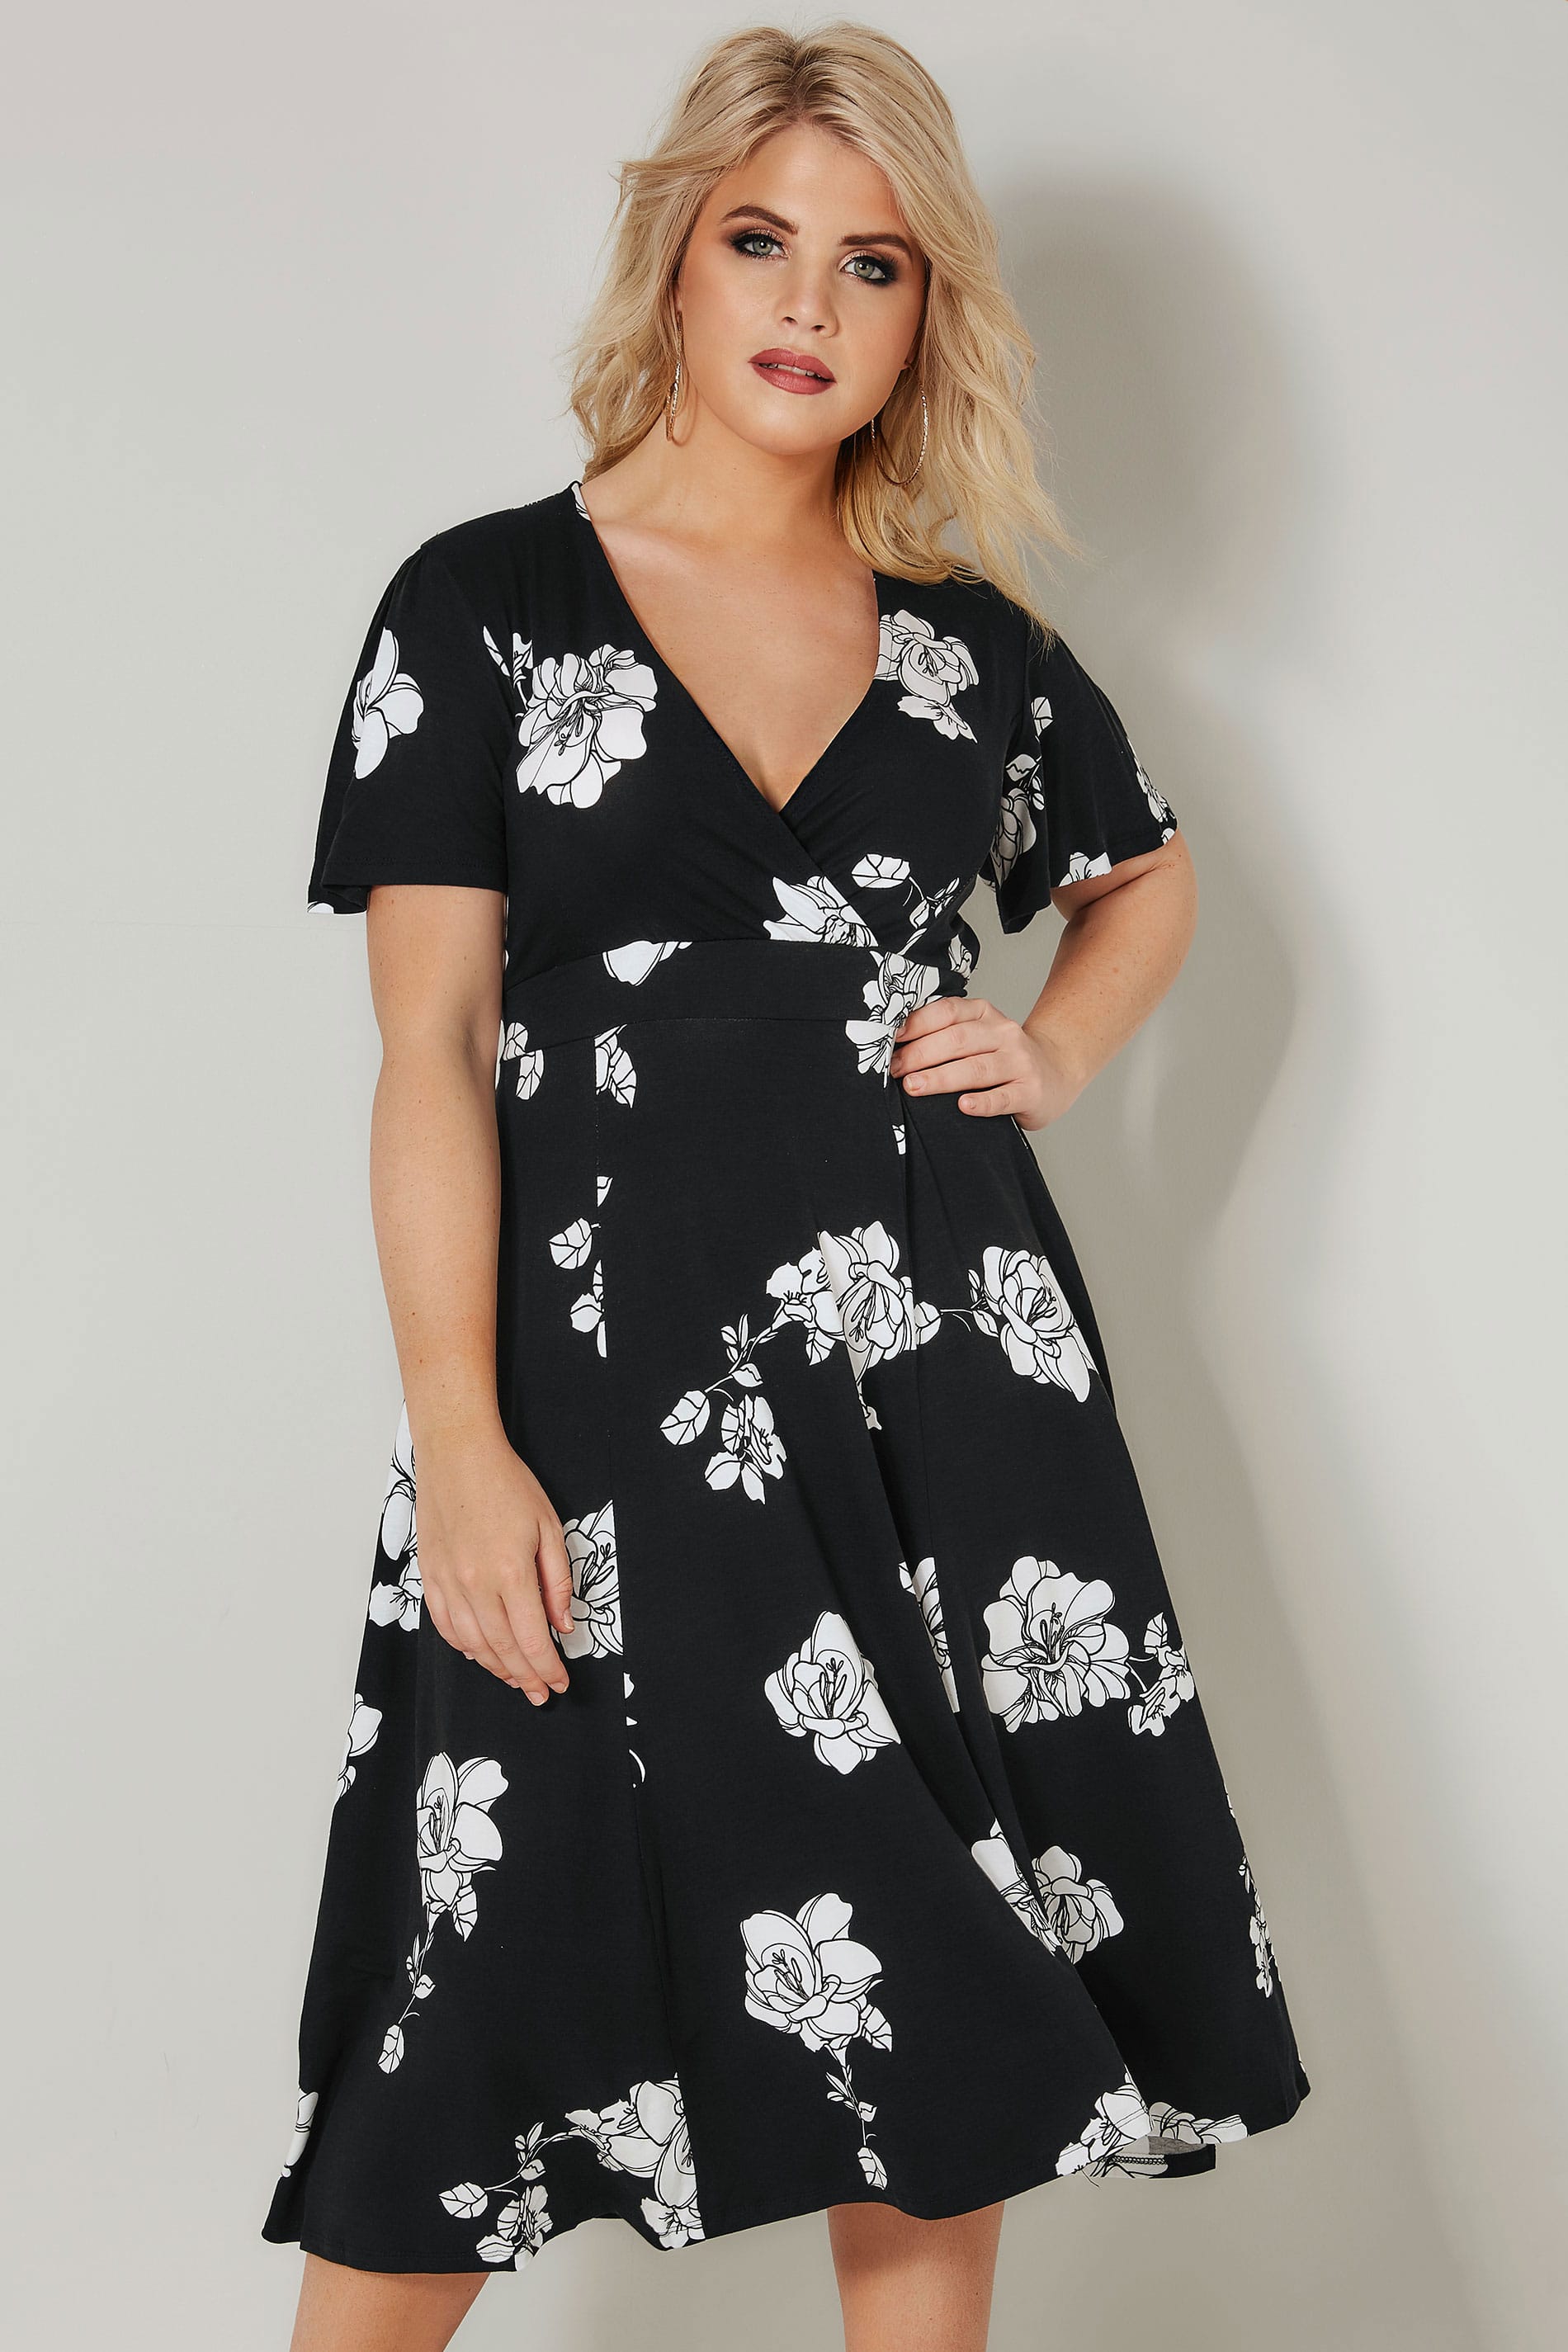 Black & White Floral Jersey Wrap Dress With Waist Tie, plus size 16 to ...